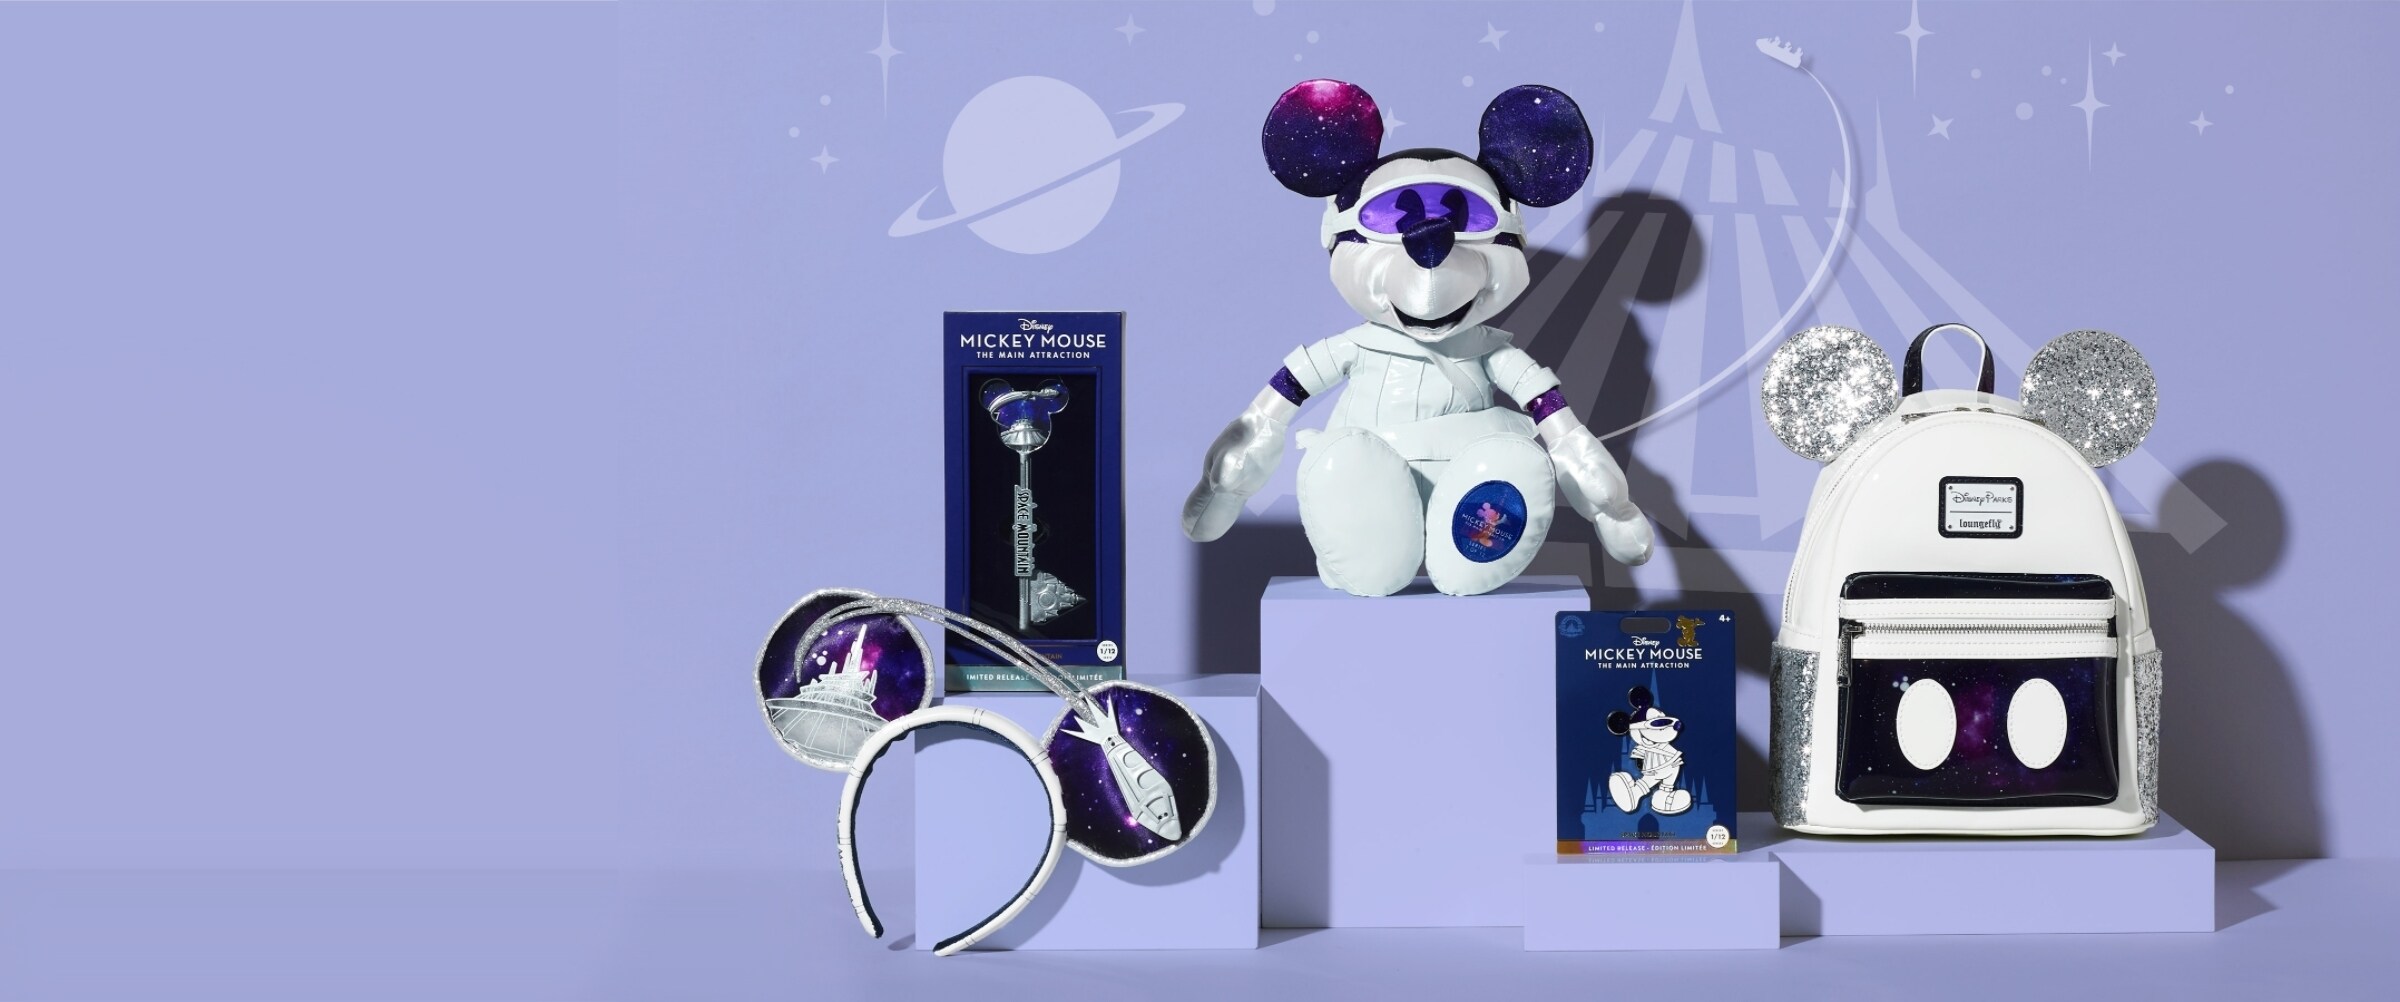 shopDisney AU | Mickey Mouse: The Main Attraction collection available now at shopdisney.com.au